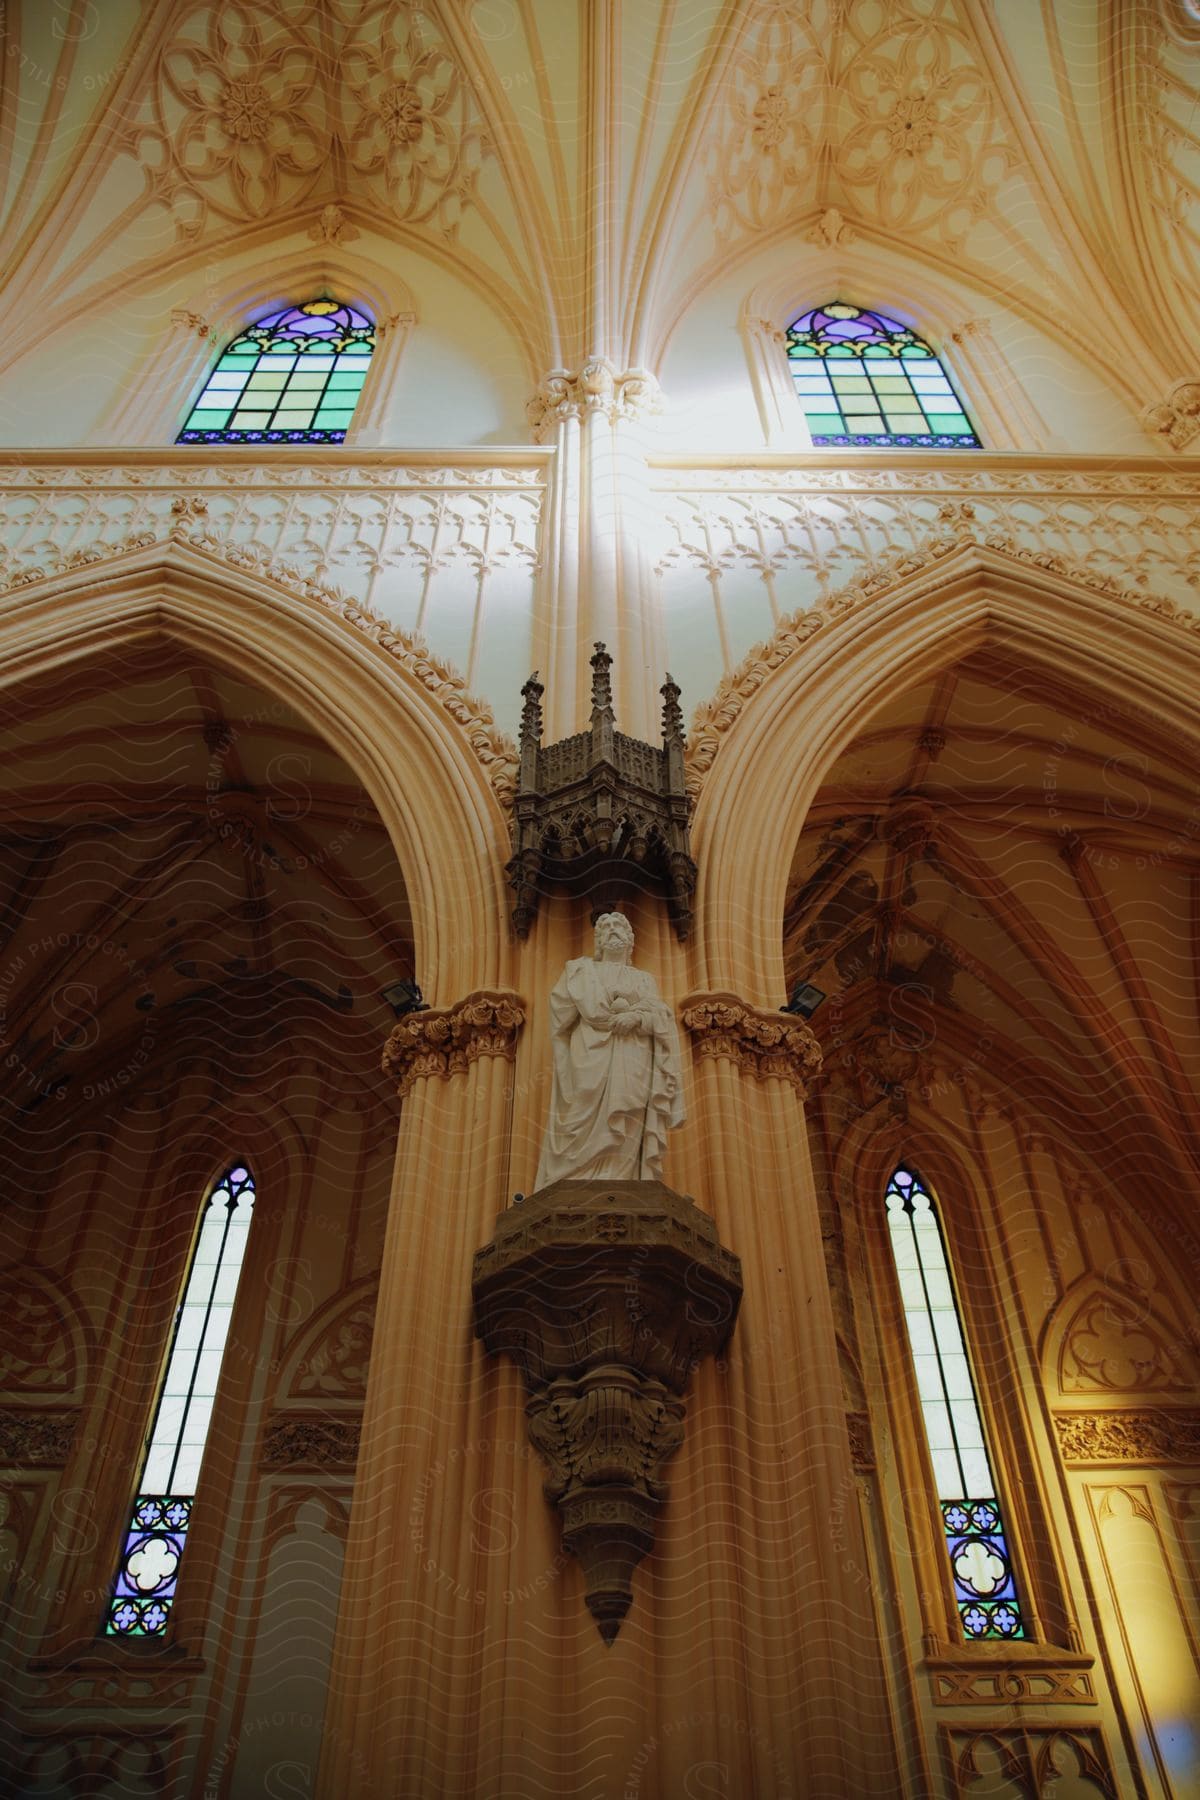 Statue on the interior of the church of saint francis of assisi